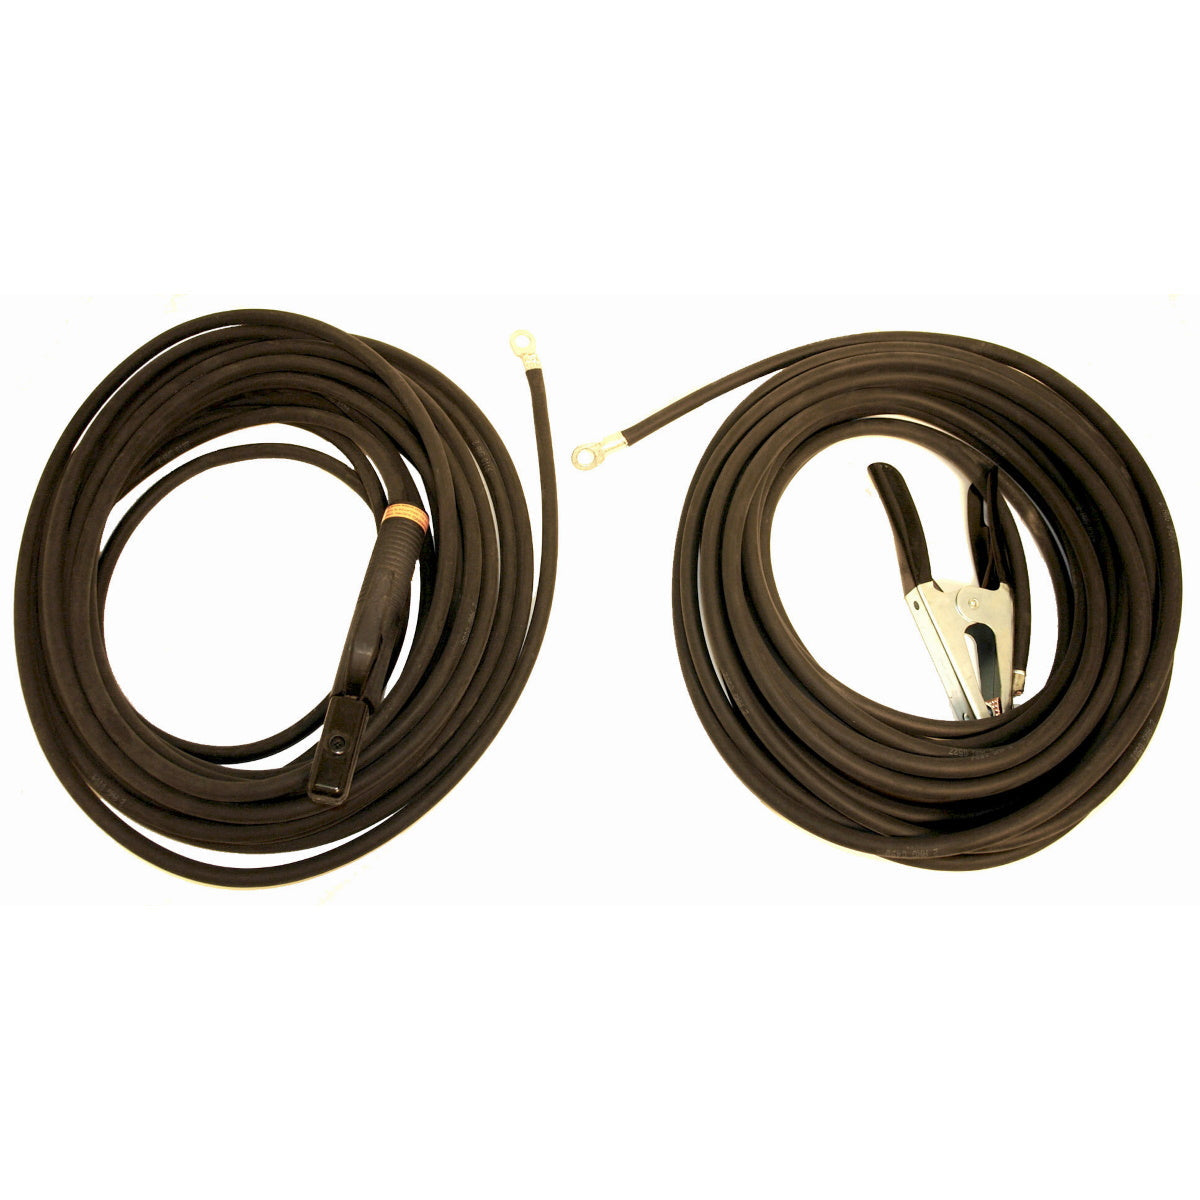 Hobart 50' Leads No. 2 Stick Cable Set (195195)